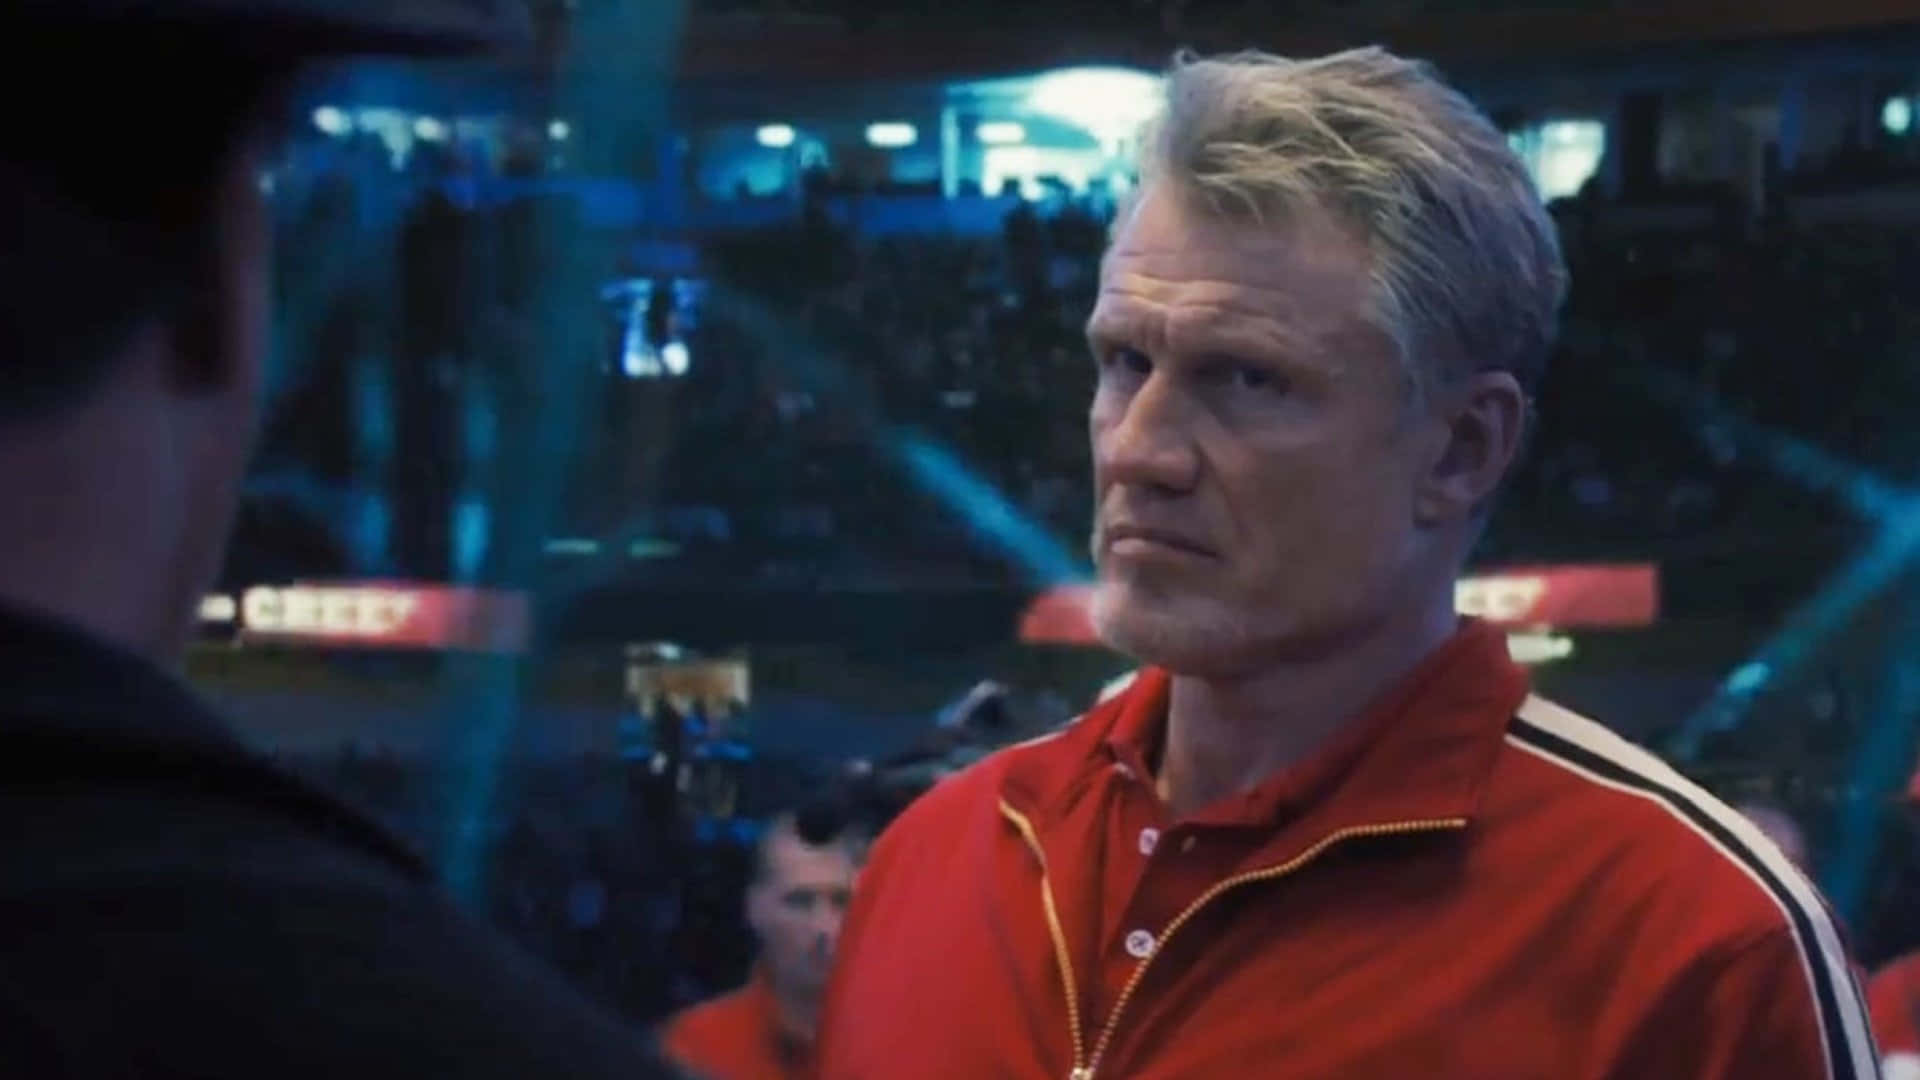 Caption: Dolph Lundgren: Hollywood's Iconic Action Star Wallpaper